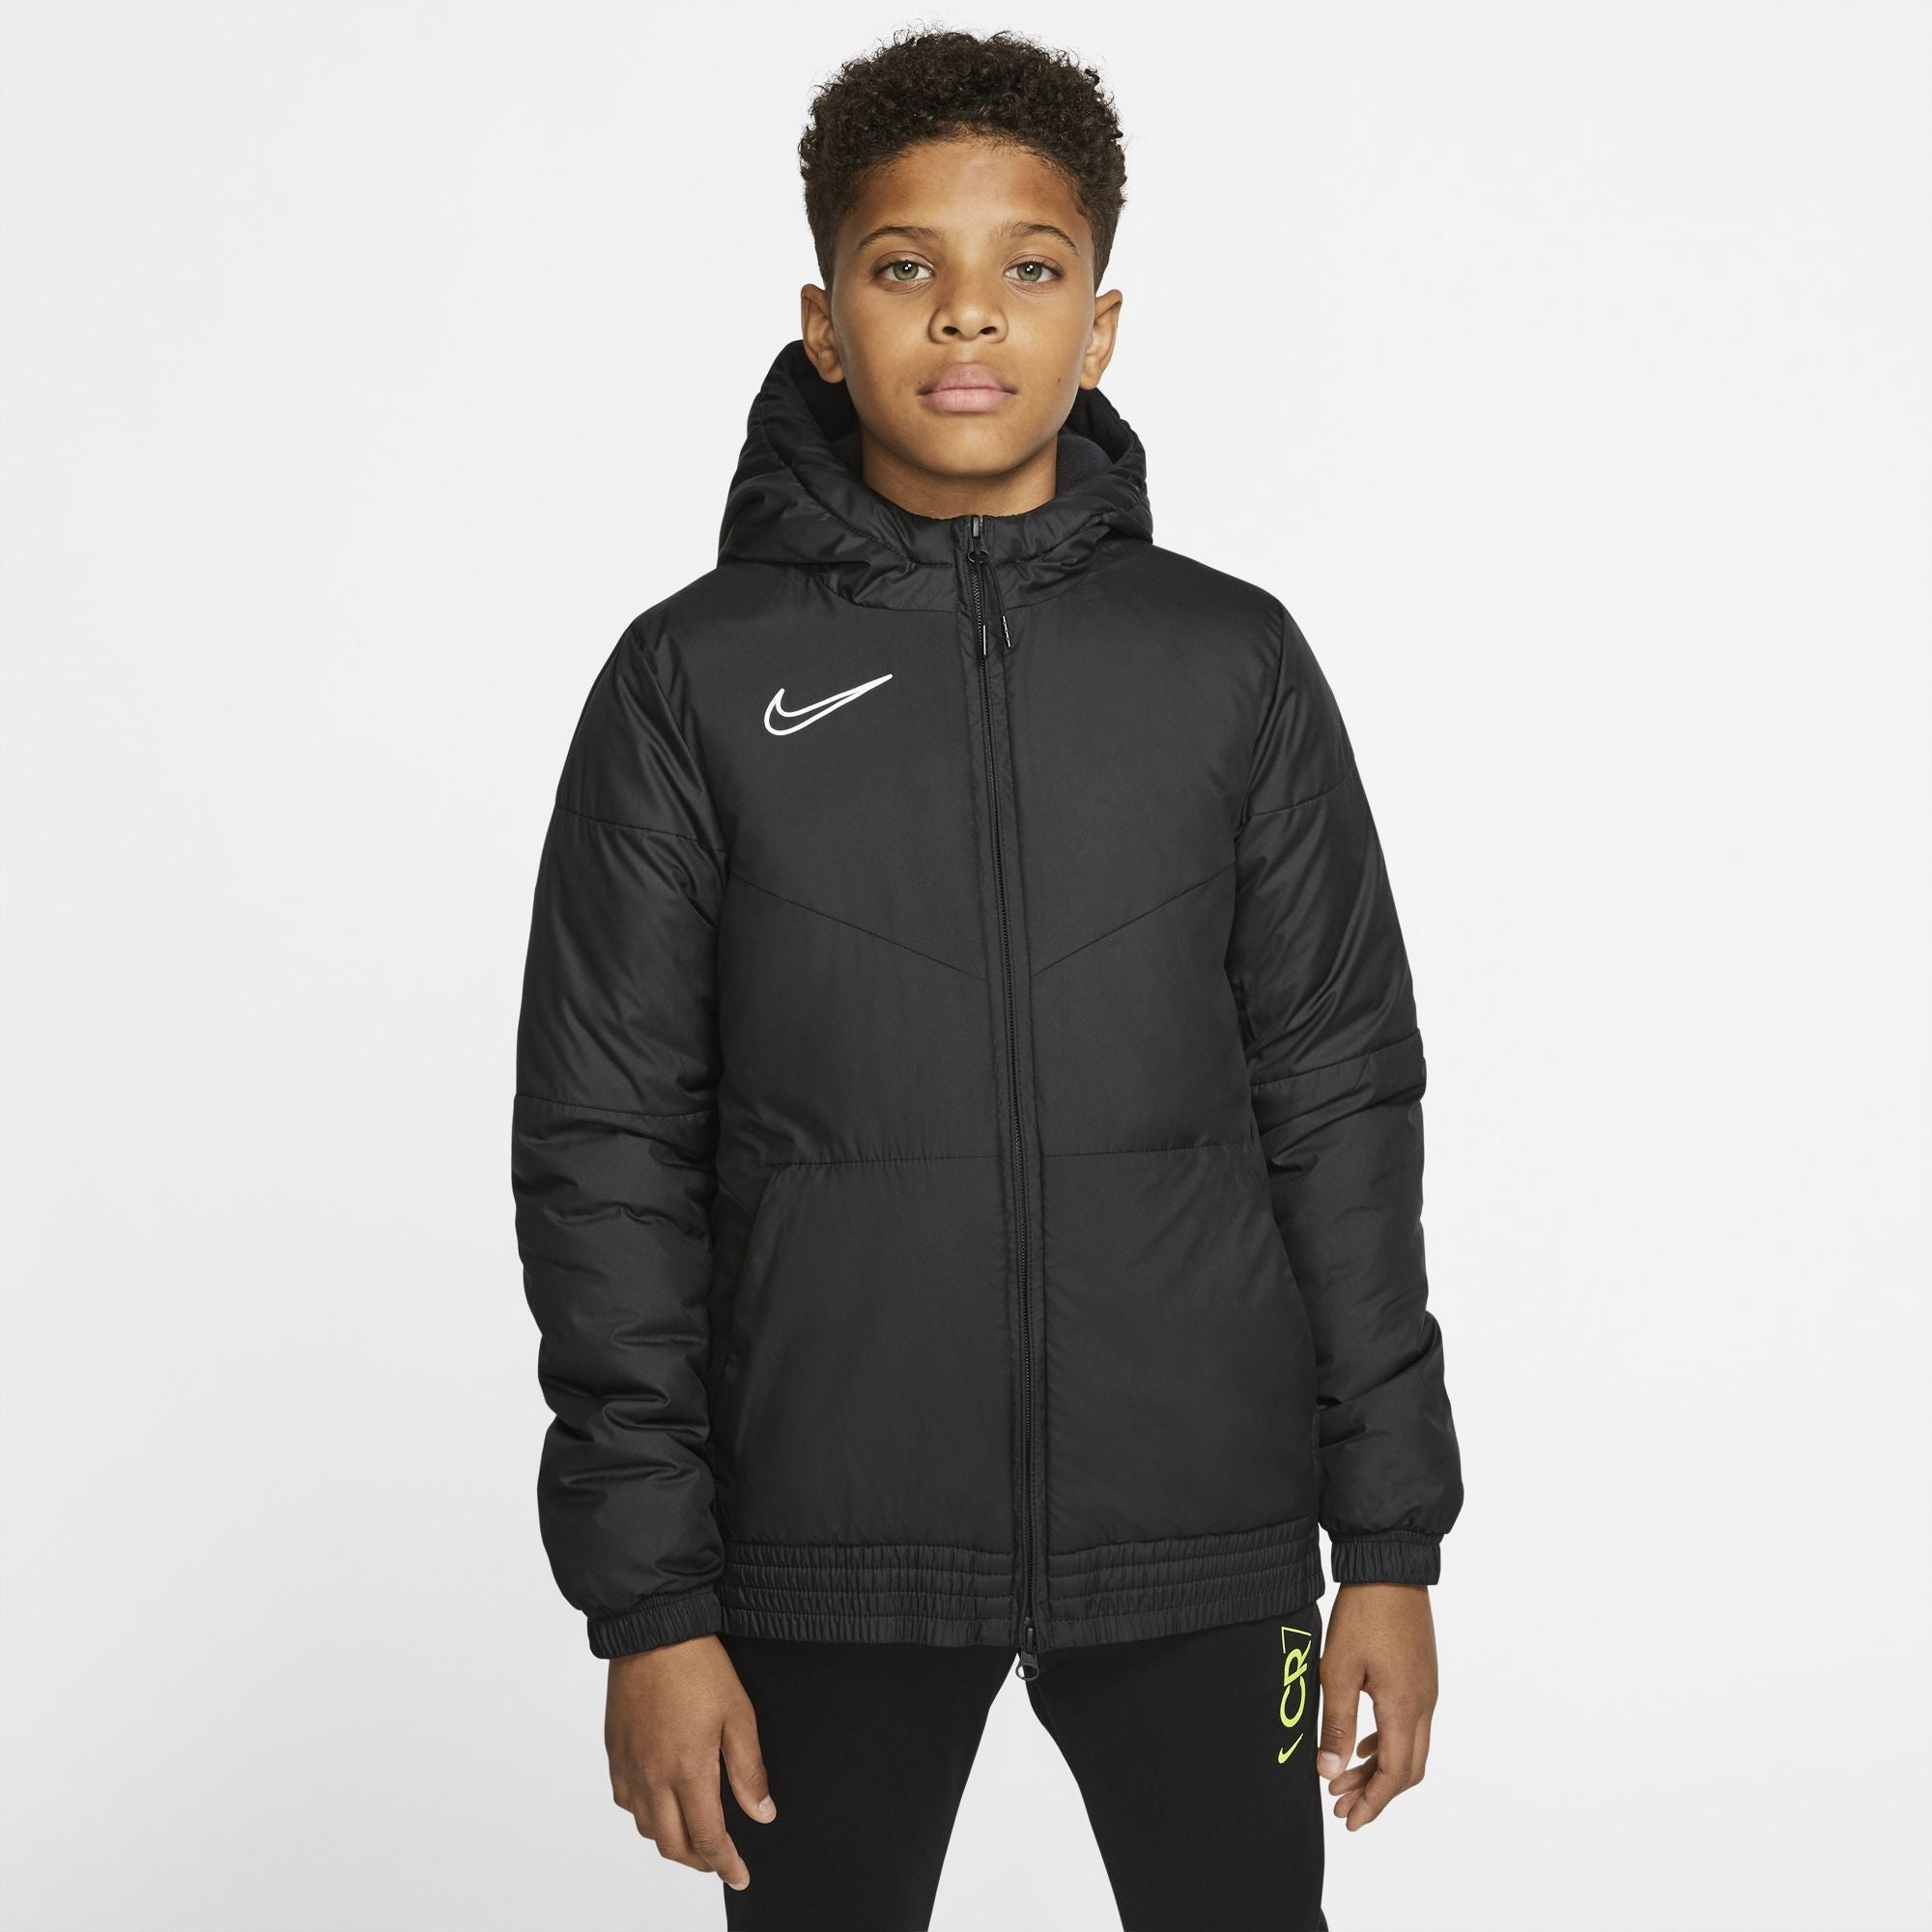 Real NJ FC Nike Therma-Fit Academy Pro 24 Jacket Black – Soccer